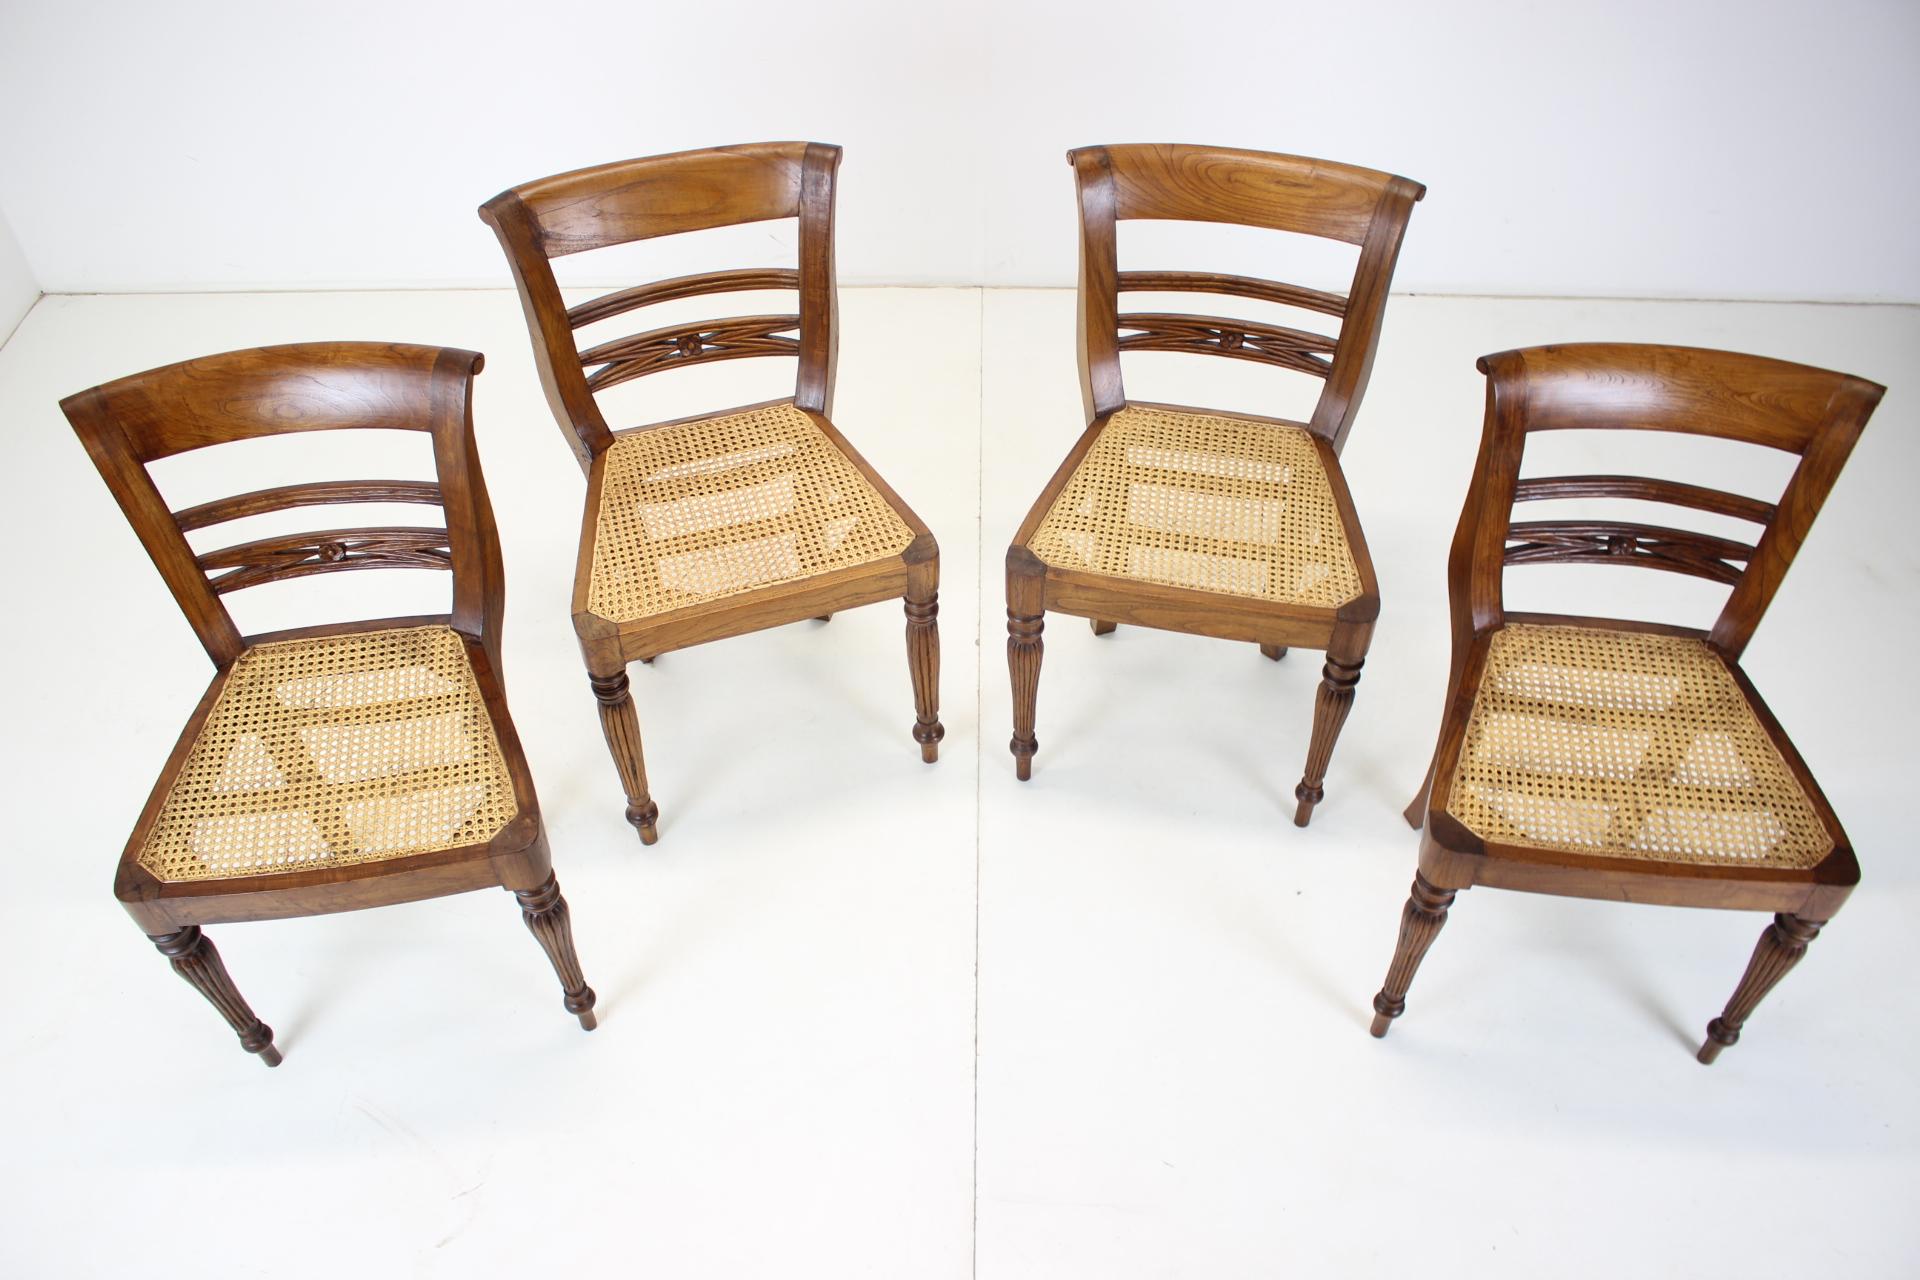 Mid-Century Modern Set of Four Dining Chairs, Made of Solid Wood, 1950s, Czechoslovakia For Sale